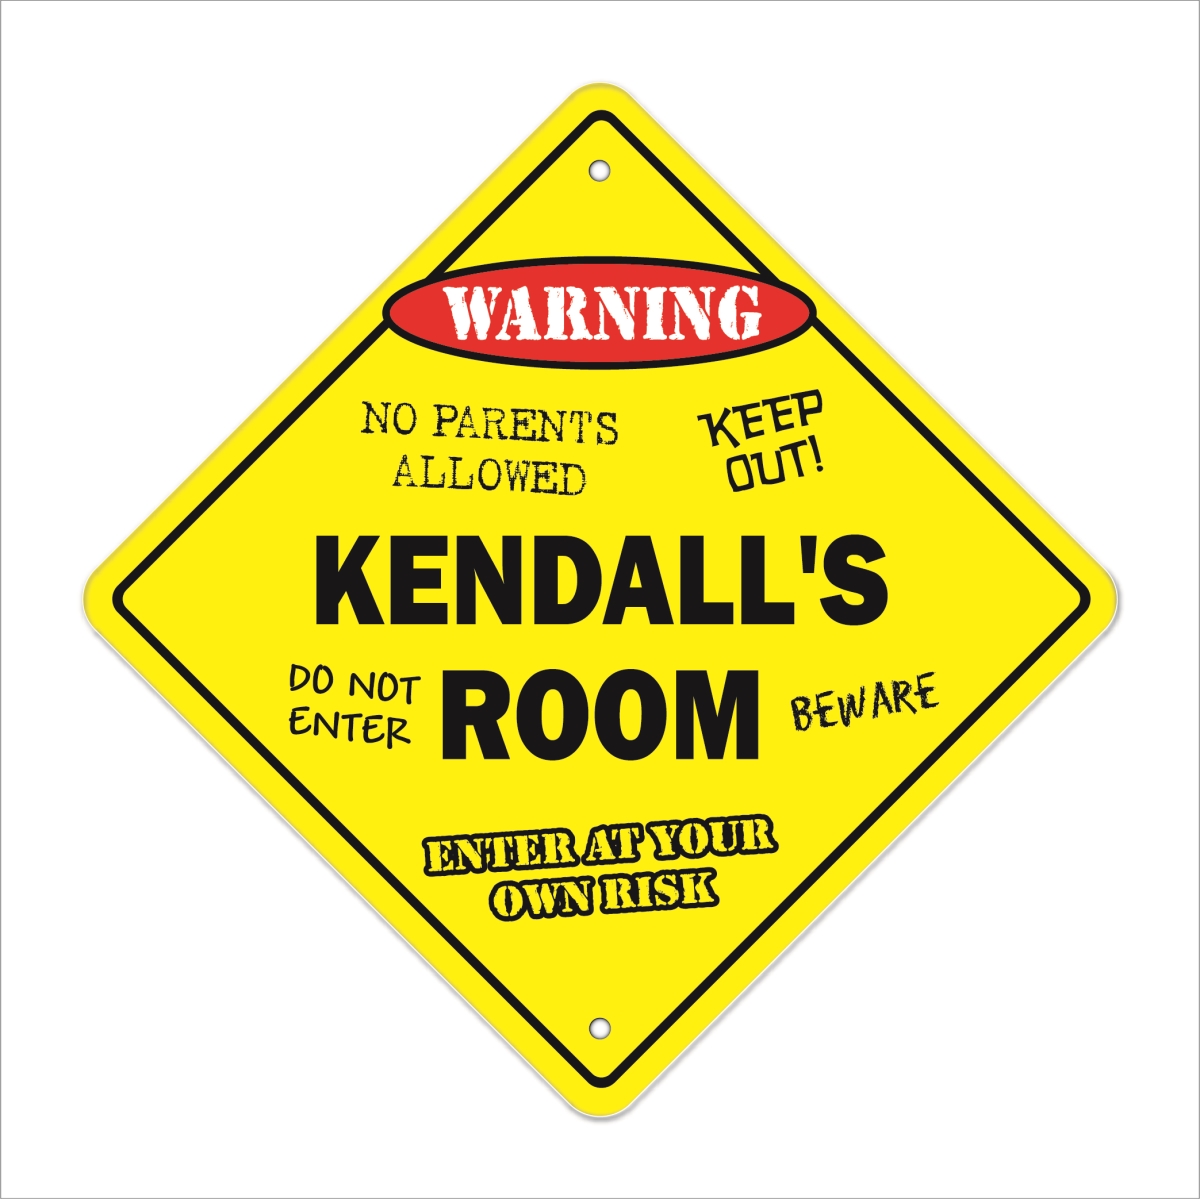 SignMission X-Kendalls Room 12 x 12 in. Crossing Zone Xing Room Sign - Kendalls